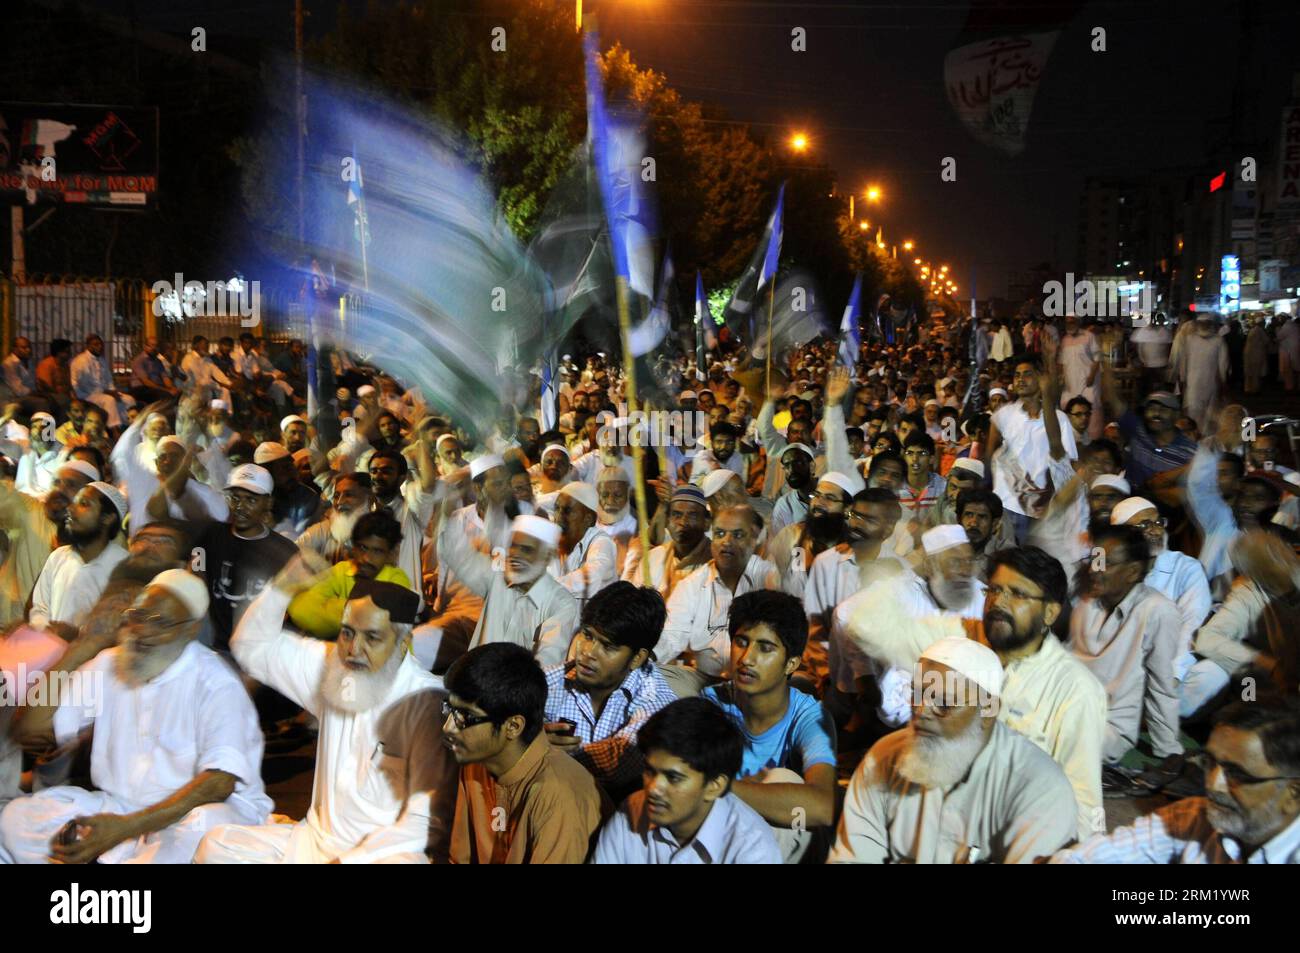 Bildnummer: 59654135  Datum: 16.05.2013  Copyright: imago/Xinhua (130516) -- KARACHI, May 16, 2013 (Xinhua) -- Supporters of Pakistan s Islamic party Jamaat-e-Islami (JI) take part in a protest rally in southern Pakistani port city of Karachi on May 16, 2013. The Election Commission of Pakistan has issued the results of 261 seats out of total 272 of the National Assembly on its website. (Xinhua Photo/Masroor) (zf) PAKISTAN-KARACHI-PROTEST-ELECTIONS PUBLICATIONxNOTxINxCHN Politik x0x xsk 2013 quer      59654135 Date 16 05 2013 Copyright Imago XINHUA  Karachi May 16 2013 XINHUA Supporters of Pak Stock Photo